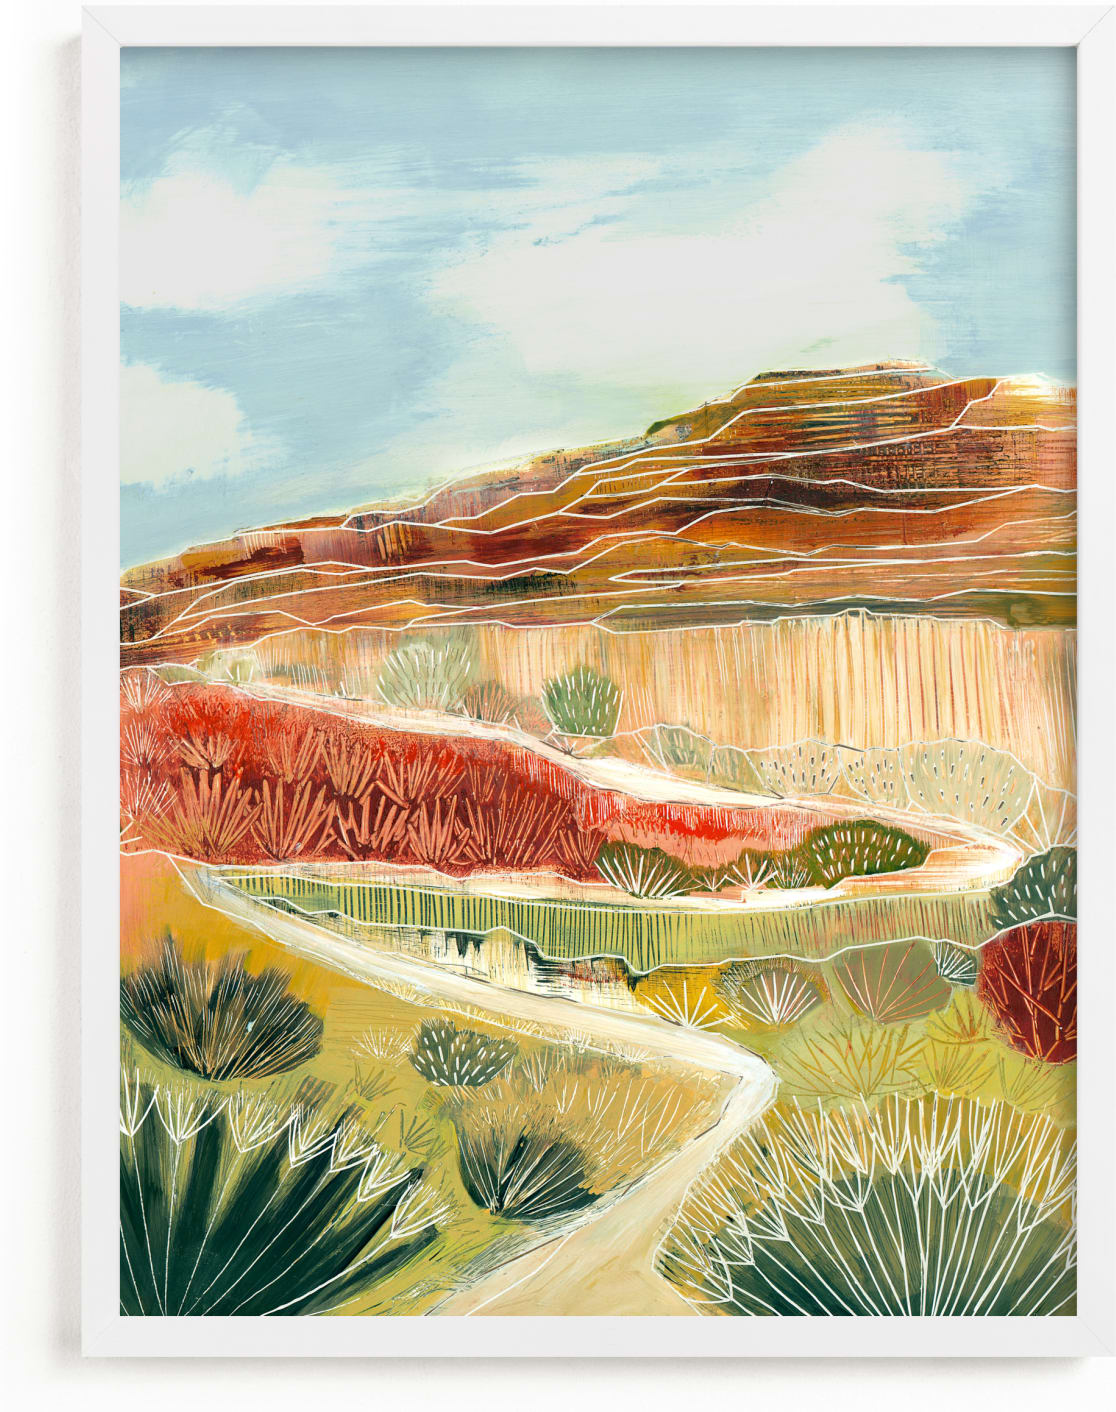 This is a brown art by Sarah Fitzgerald called Ancient Desert Path.